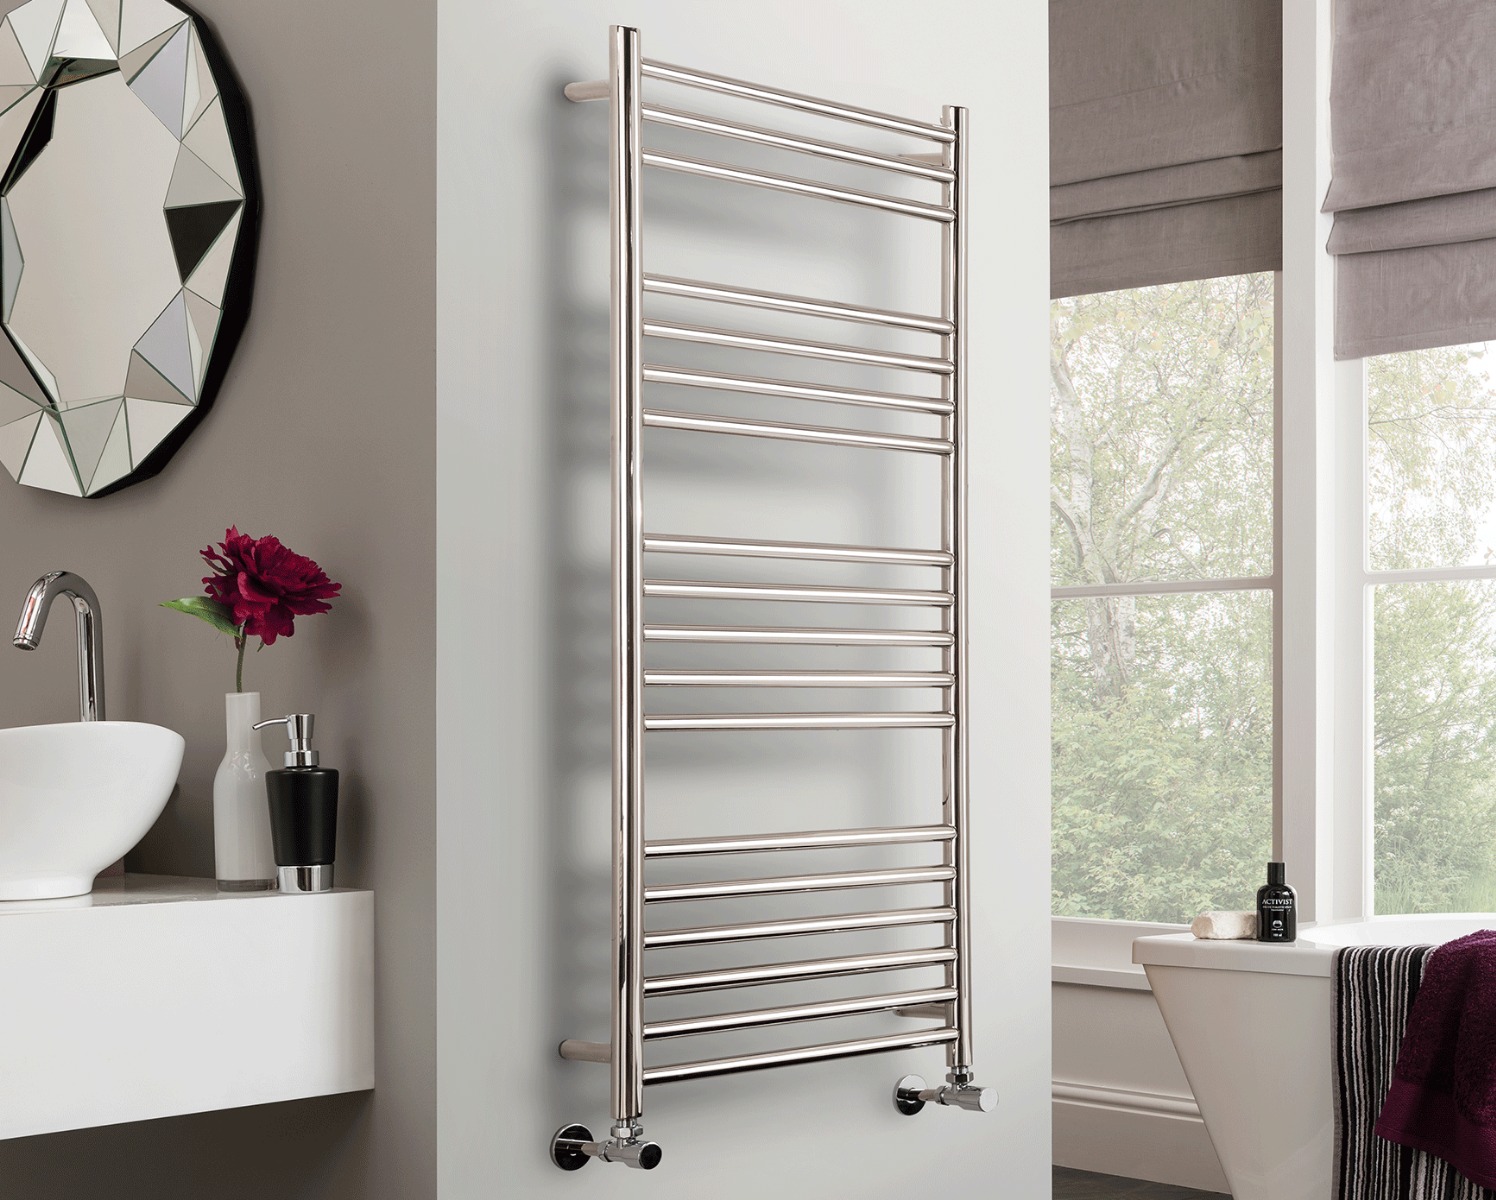 Ladder Rails Chube Heating Only - Polished Stainless Steel 800x400